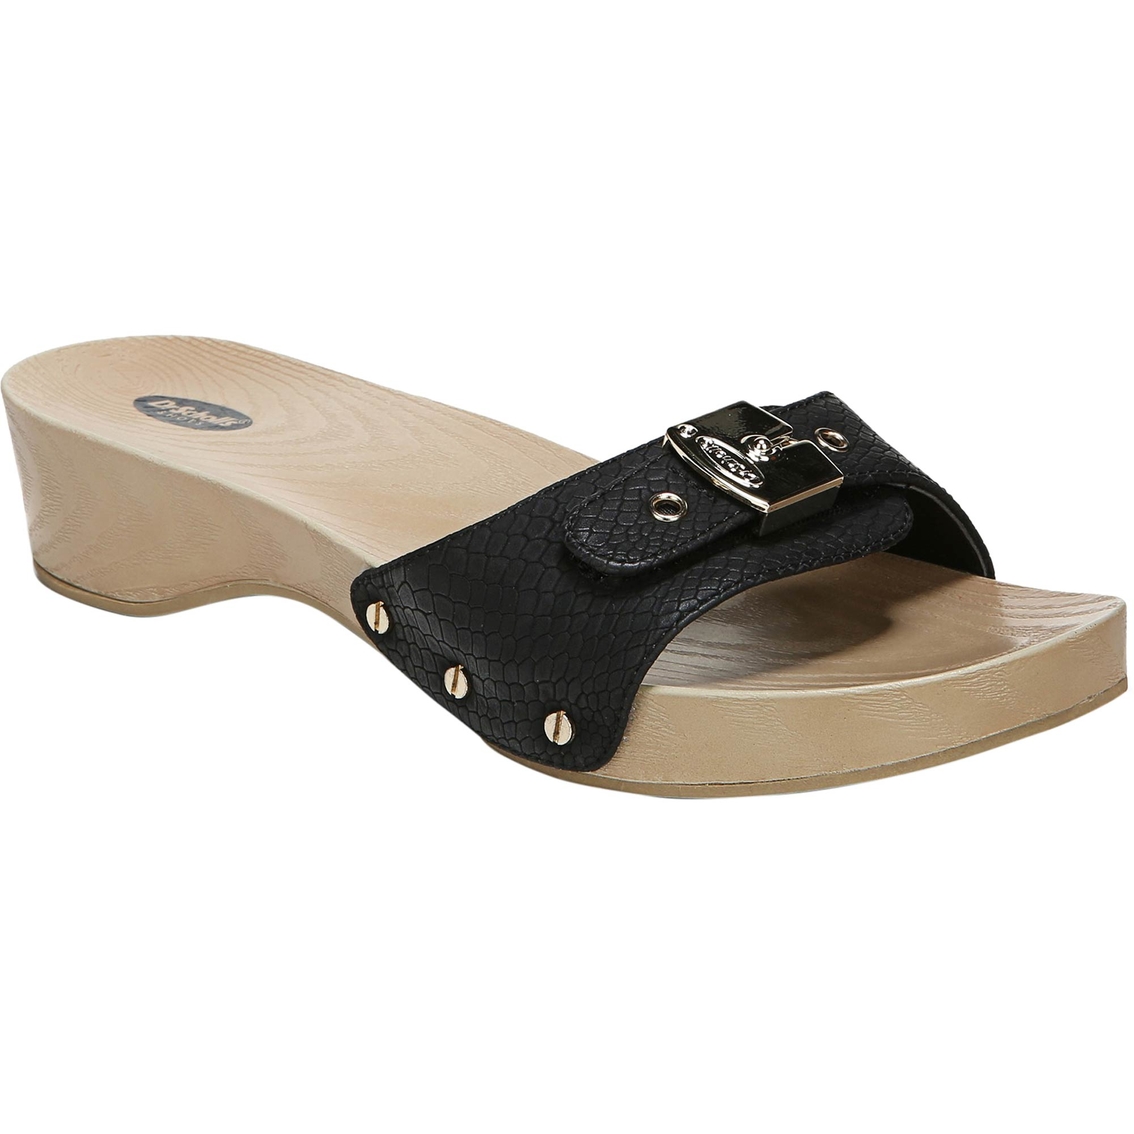 Dr. Scholl's Classic Slip On Sandals 